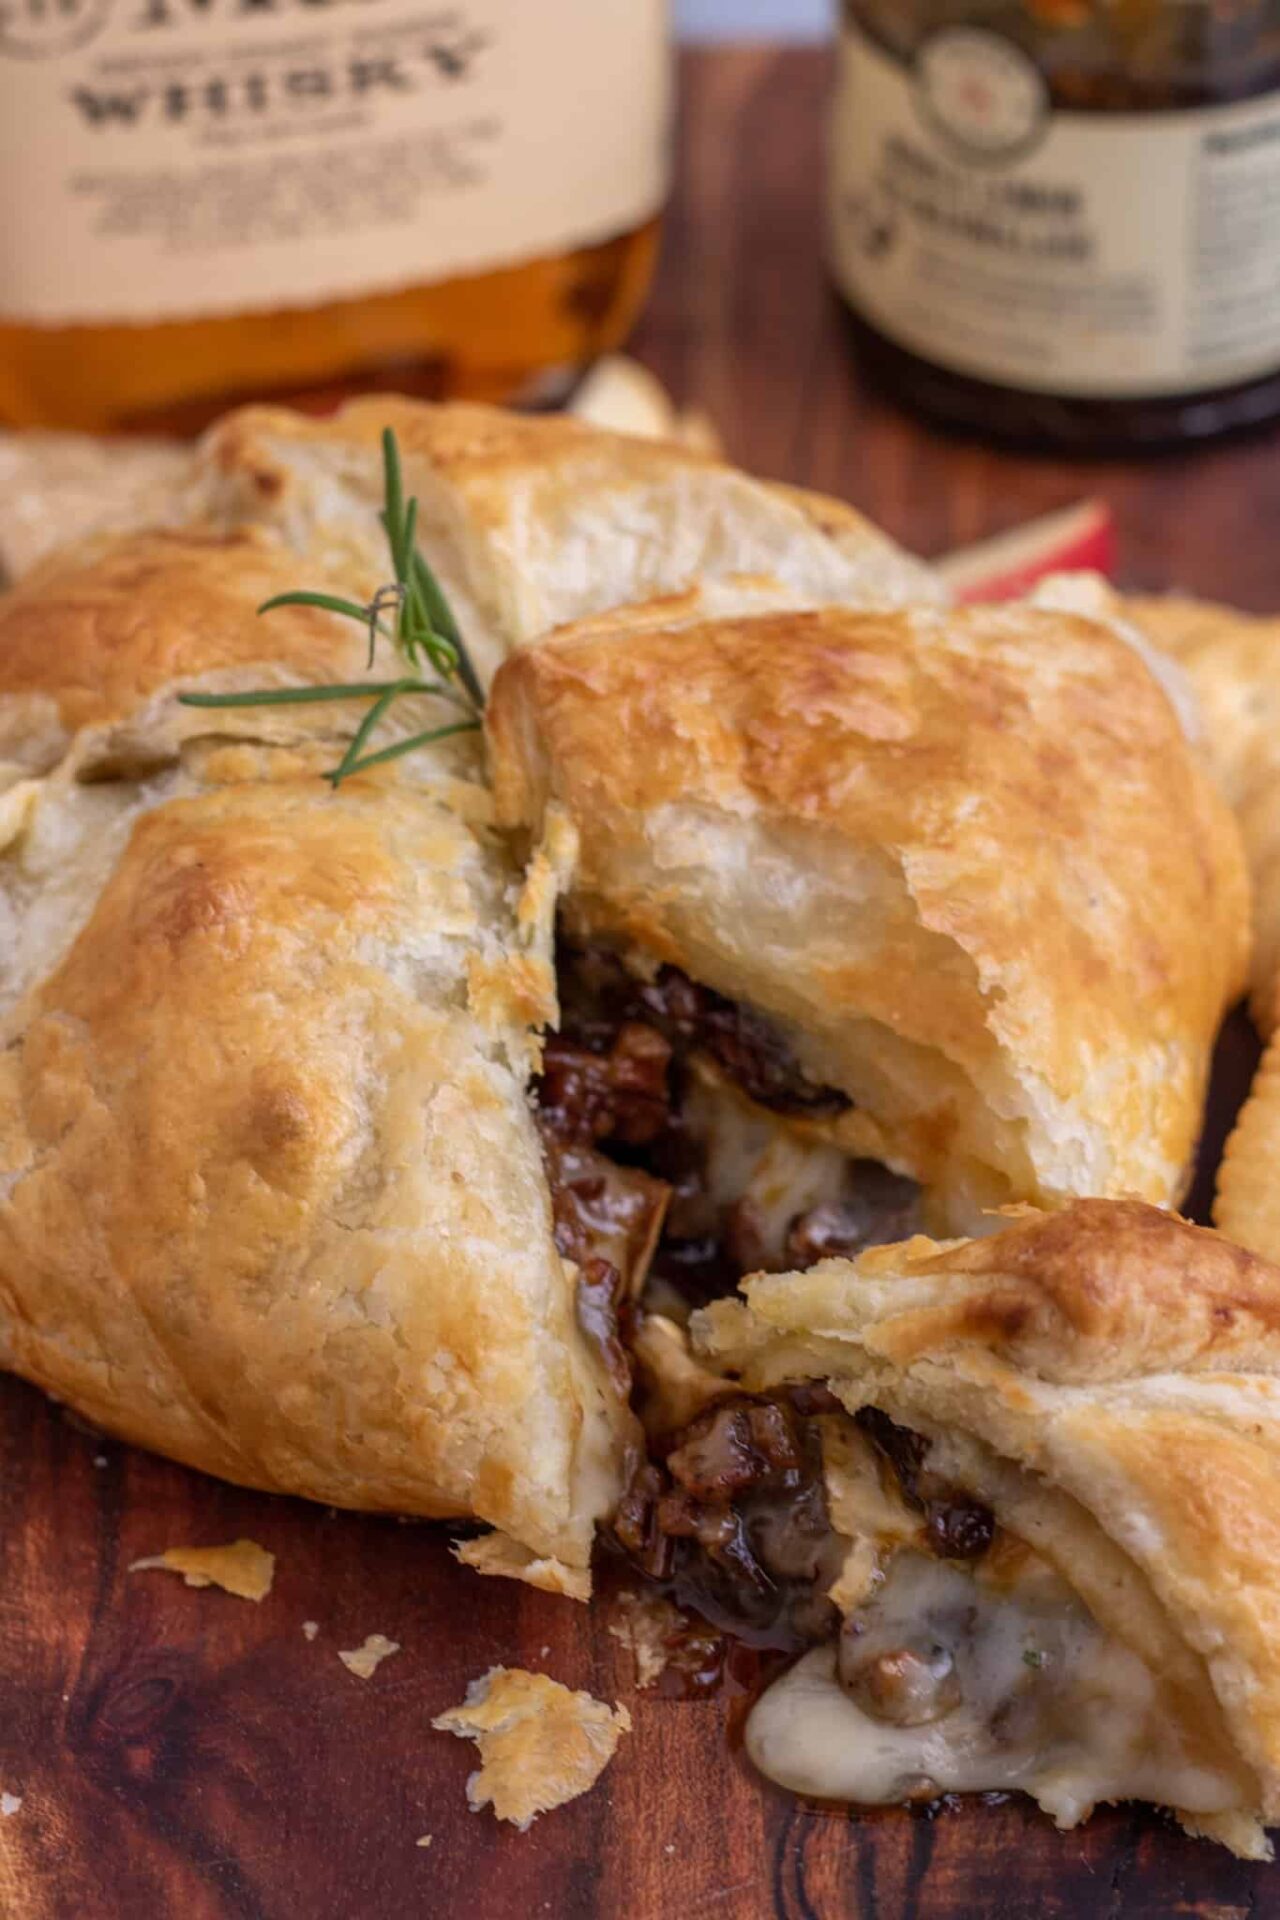 A wooden cutting board with a baked brie wrapped in puff pastry on top. The baked brie is cut into a wedge and there's melted cheese falling out of the side with pecans. It's topped with a sprig of rosemary and there's a bottle of whisky and jar of fig jam in the background